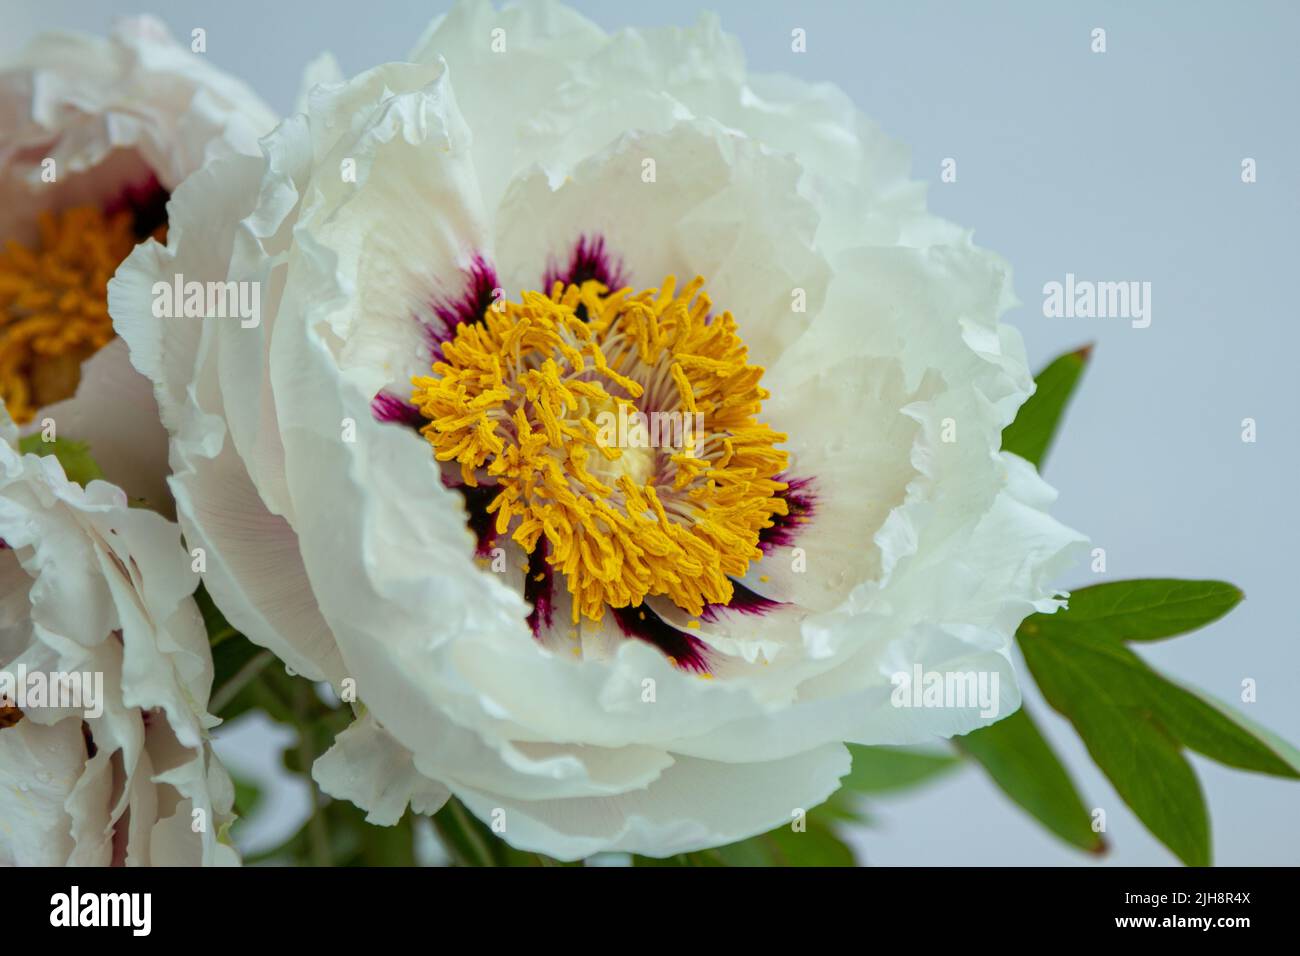 Beautiful white peony suffruticosa or tree peonies flowers bouquet with water drops on petals on a white background. Stock Photo